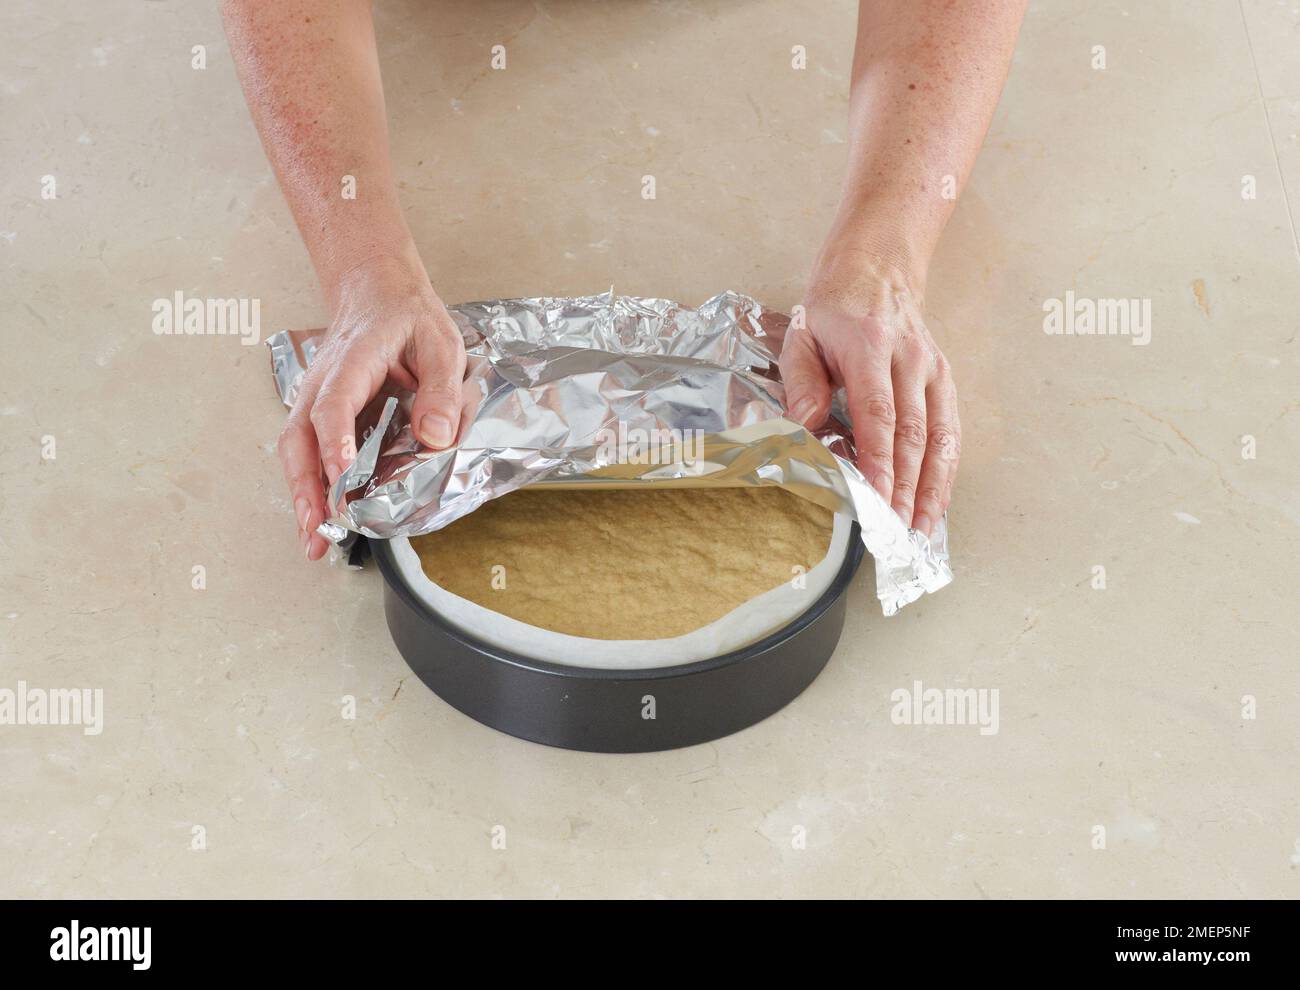 Making Shortbread, covering with foil to protect from browning Stock Photo